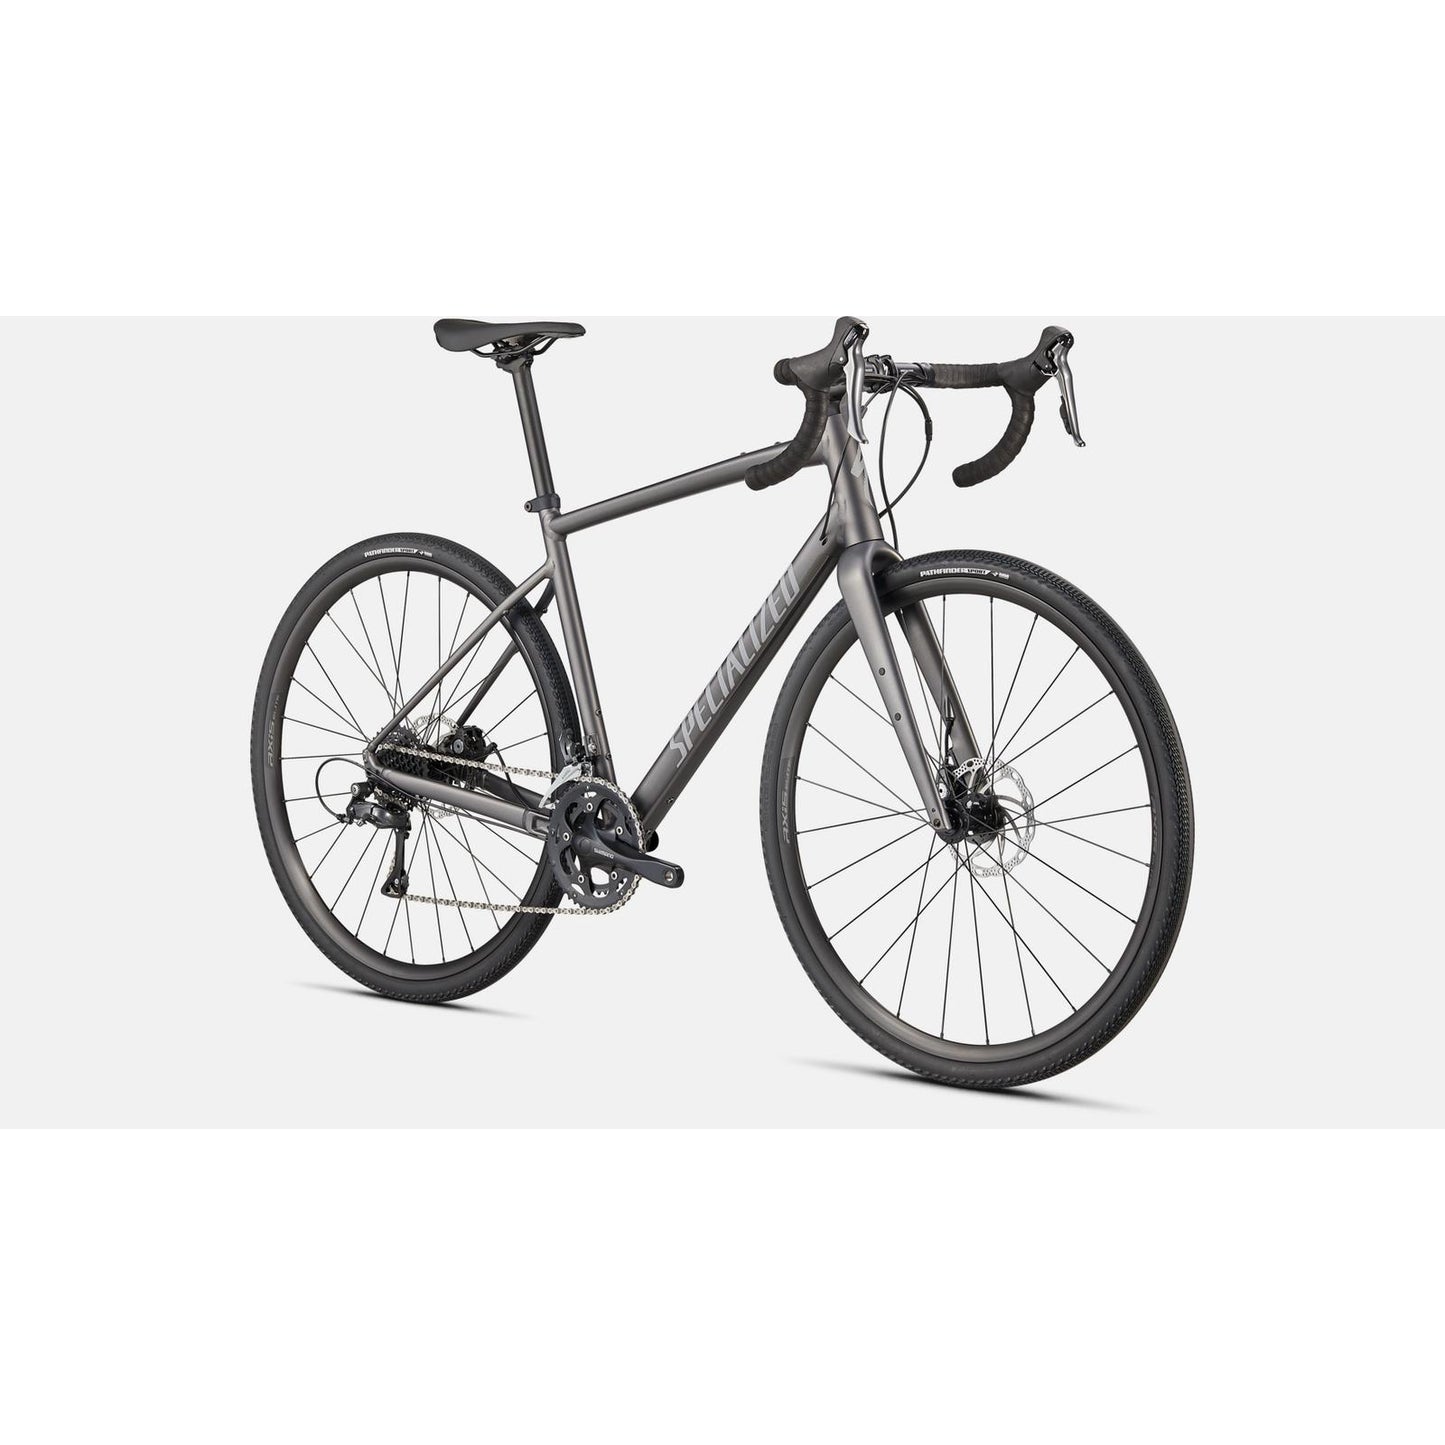 Specialized Diverge E5 Gravel Road Bike - Bikes - Bicycle Warehouse